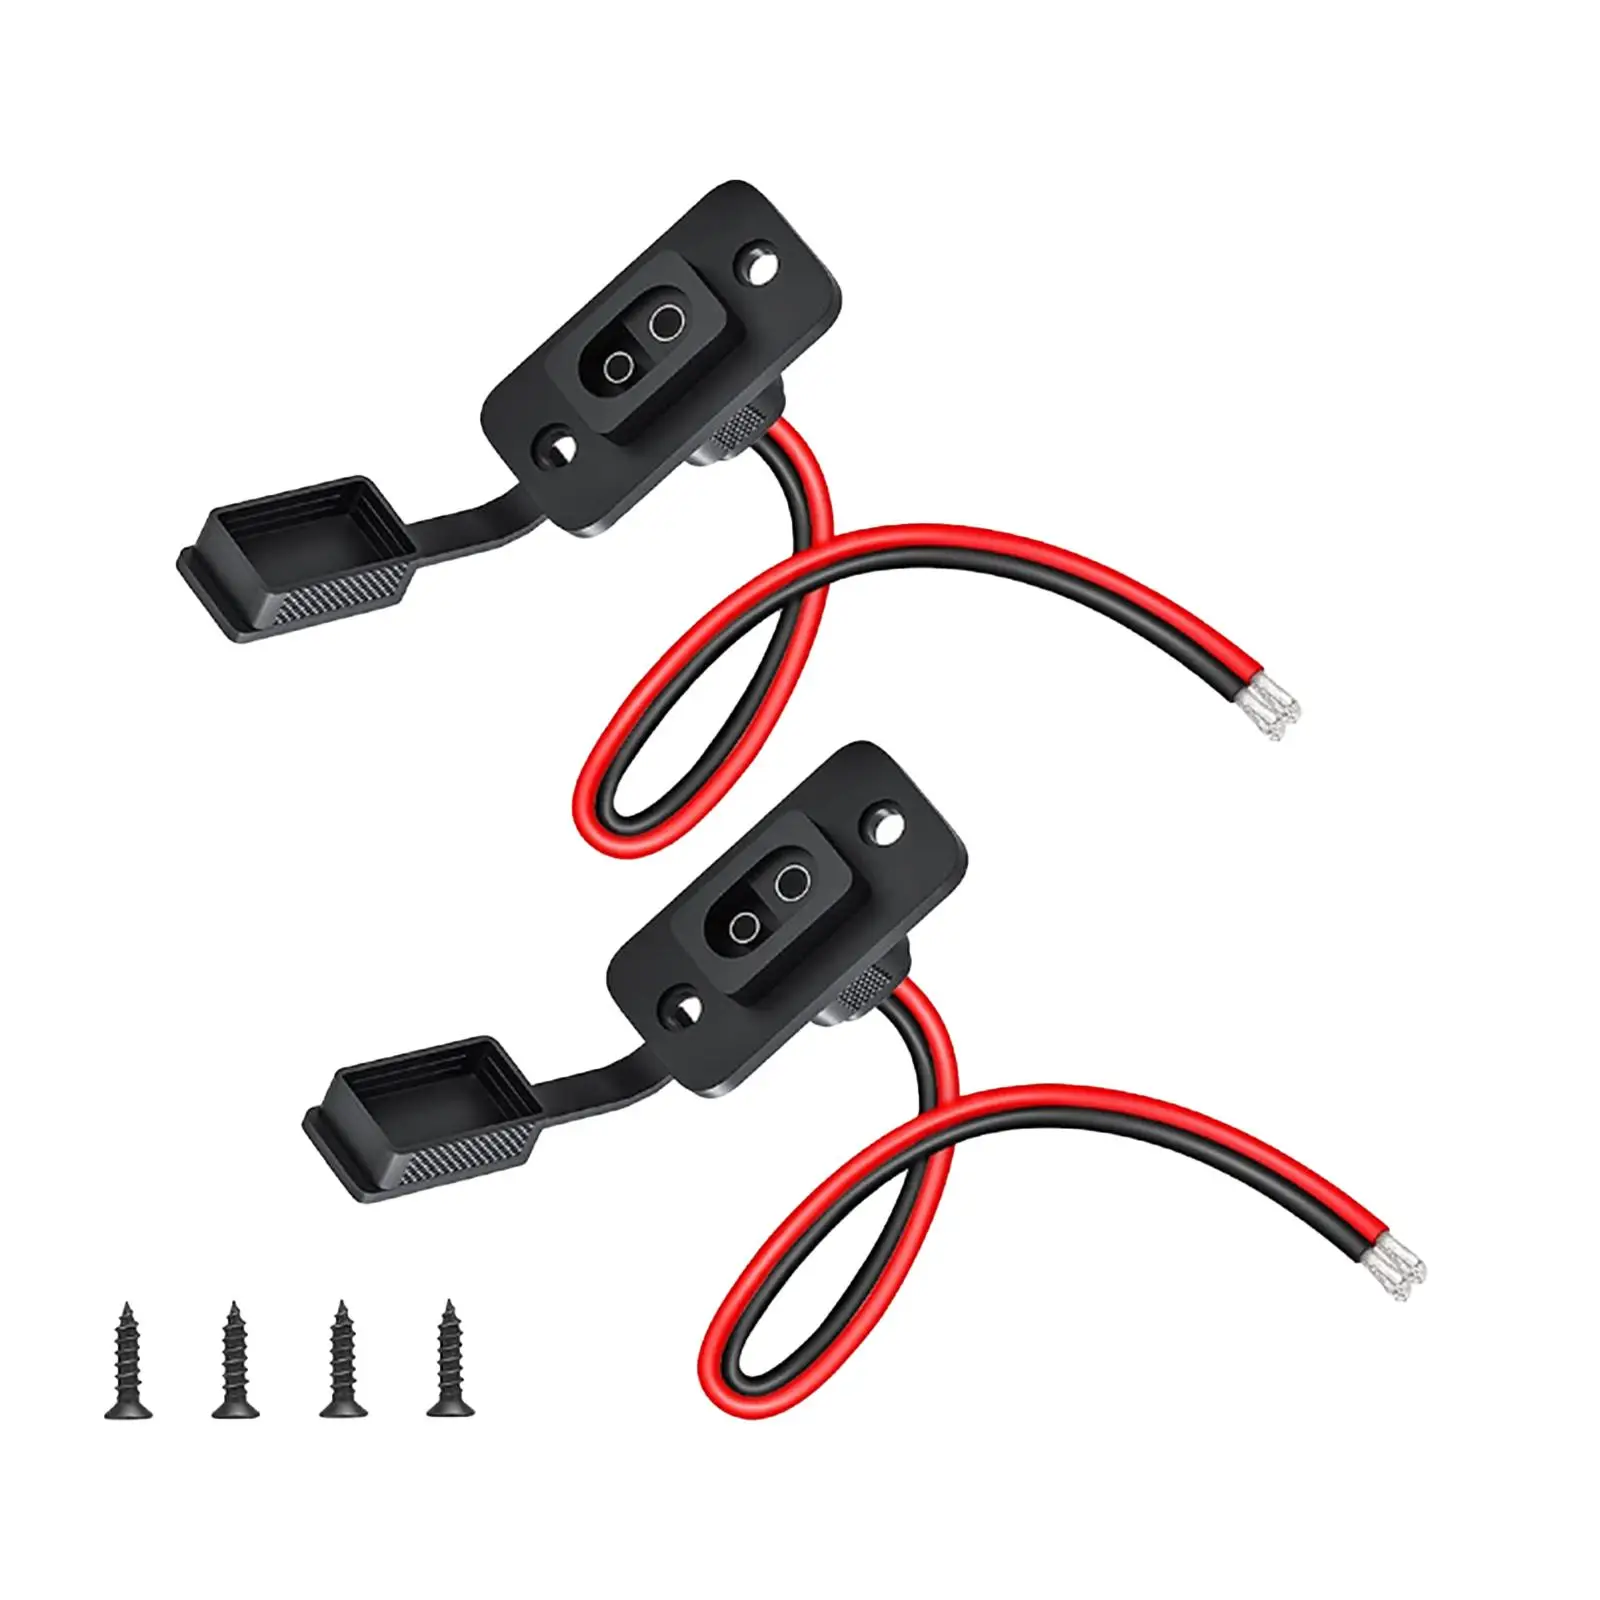 2 Pieces SAE Socket RV Waterproof Cap Weatherproof SAE Connector Connector Cables Wire 12AWG DC Power Automotive Extension Cord